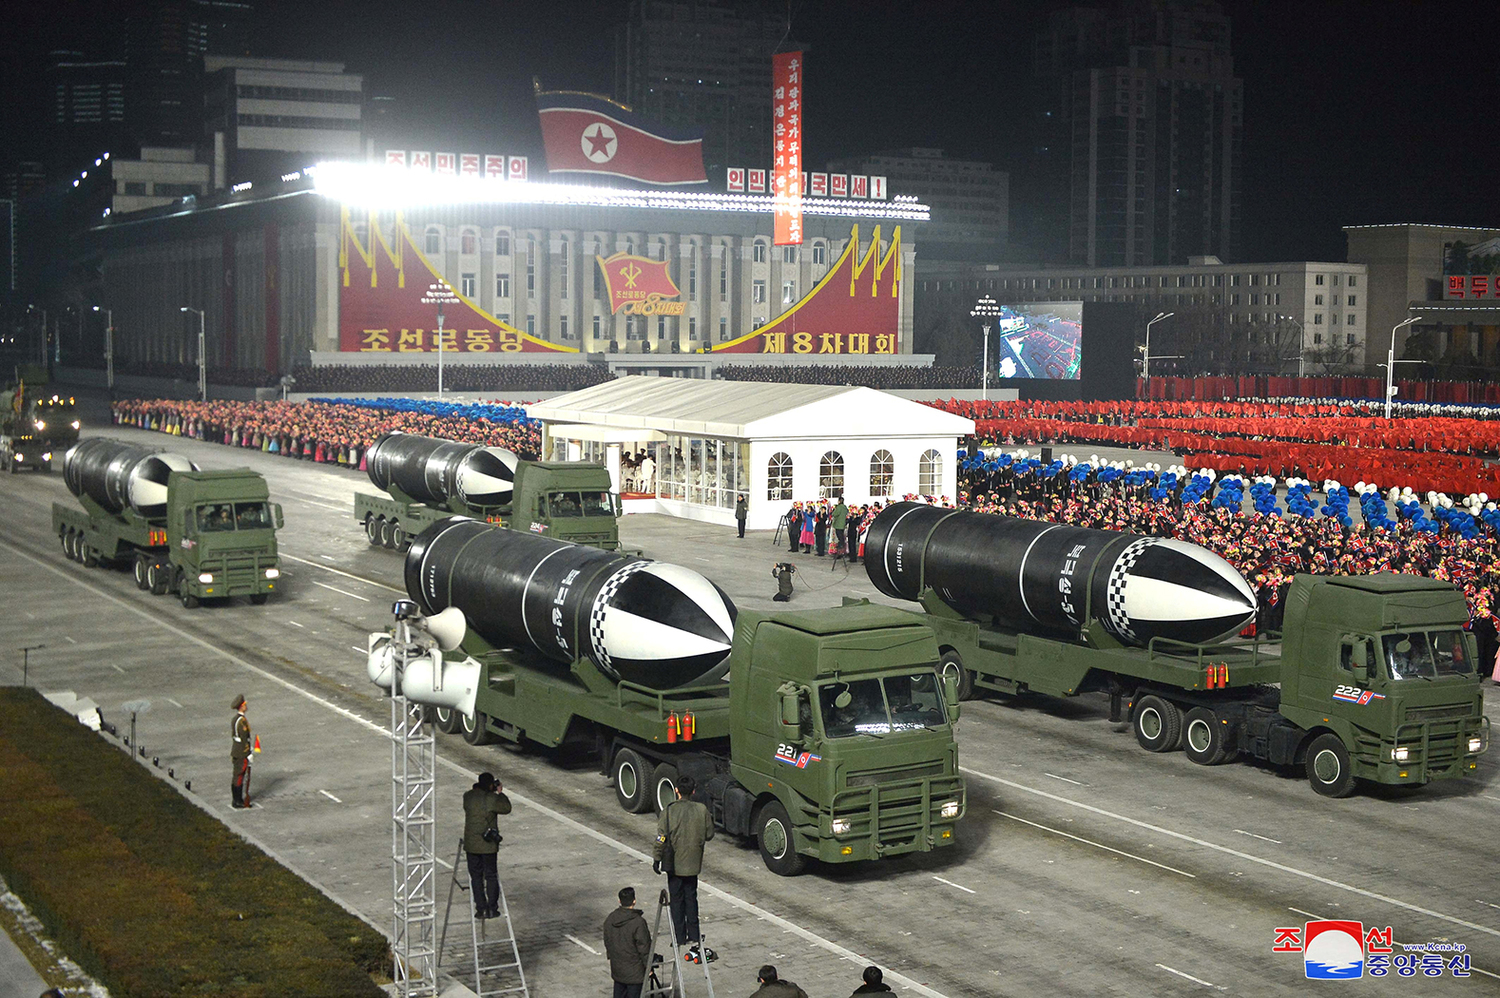 North Korea held a nightly military parade in Pyongyang's Kim Il Sung Square on the night of the 14th, displaying a new type of submarine-launched short-range ballistic missile, touted as the world's strongest weapon by state media. : Image by Dazhi / Reuters